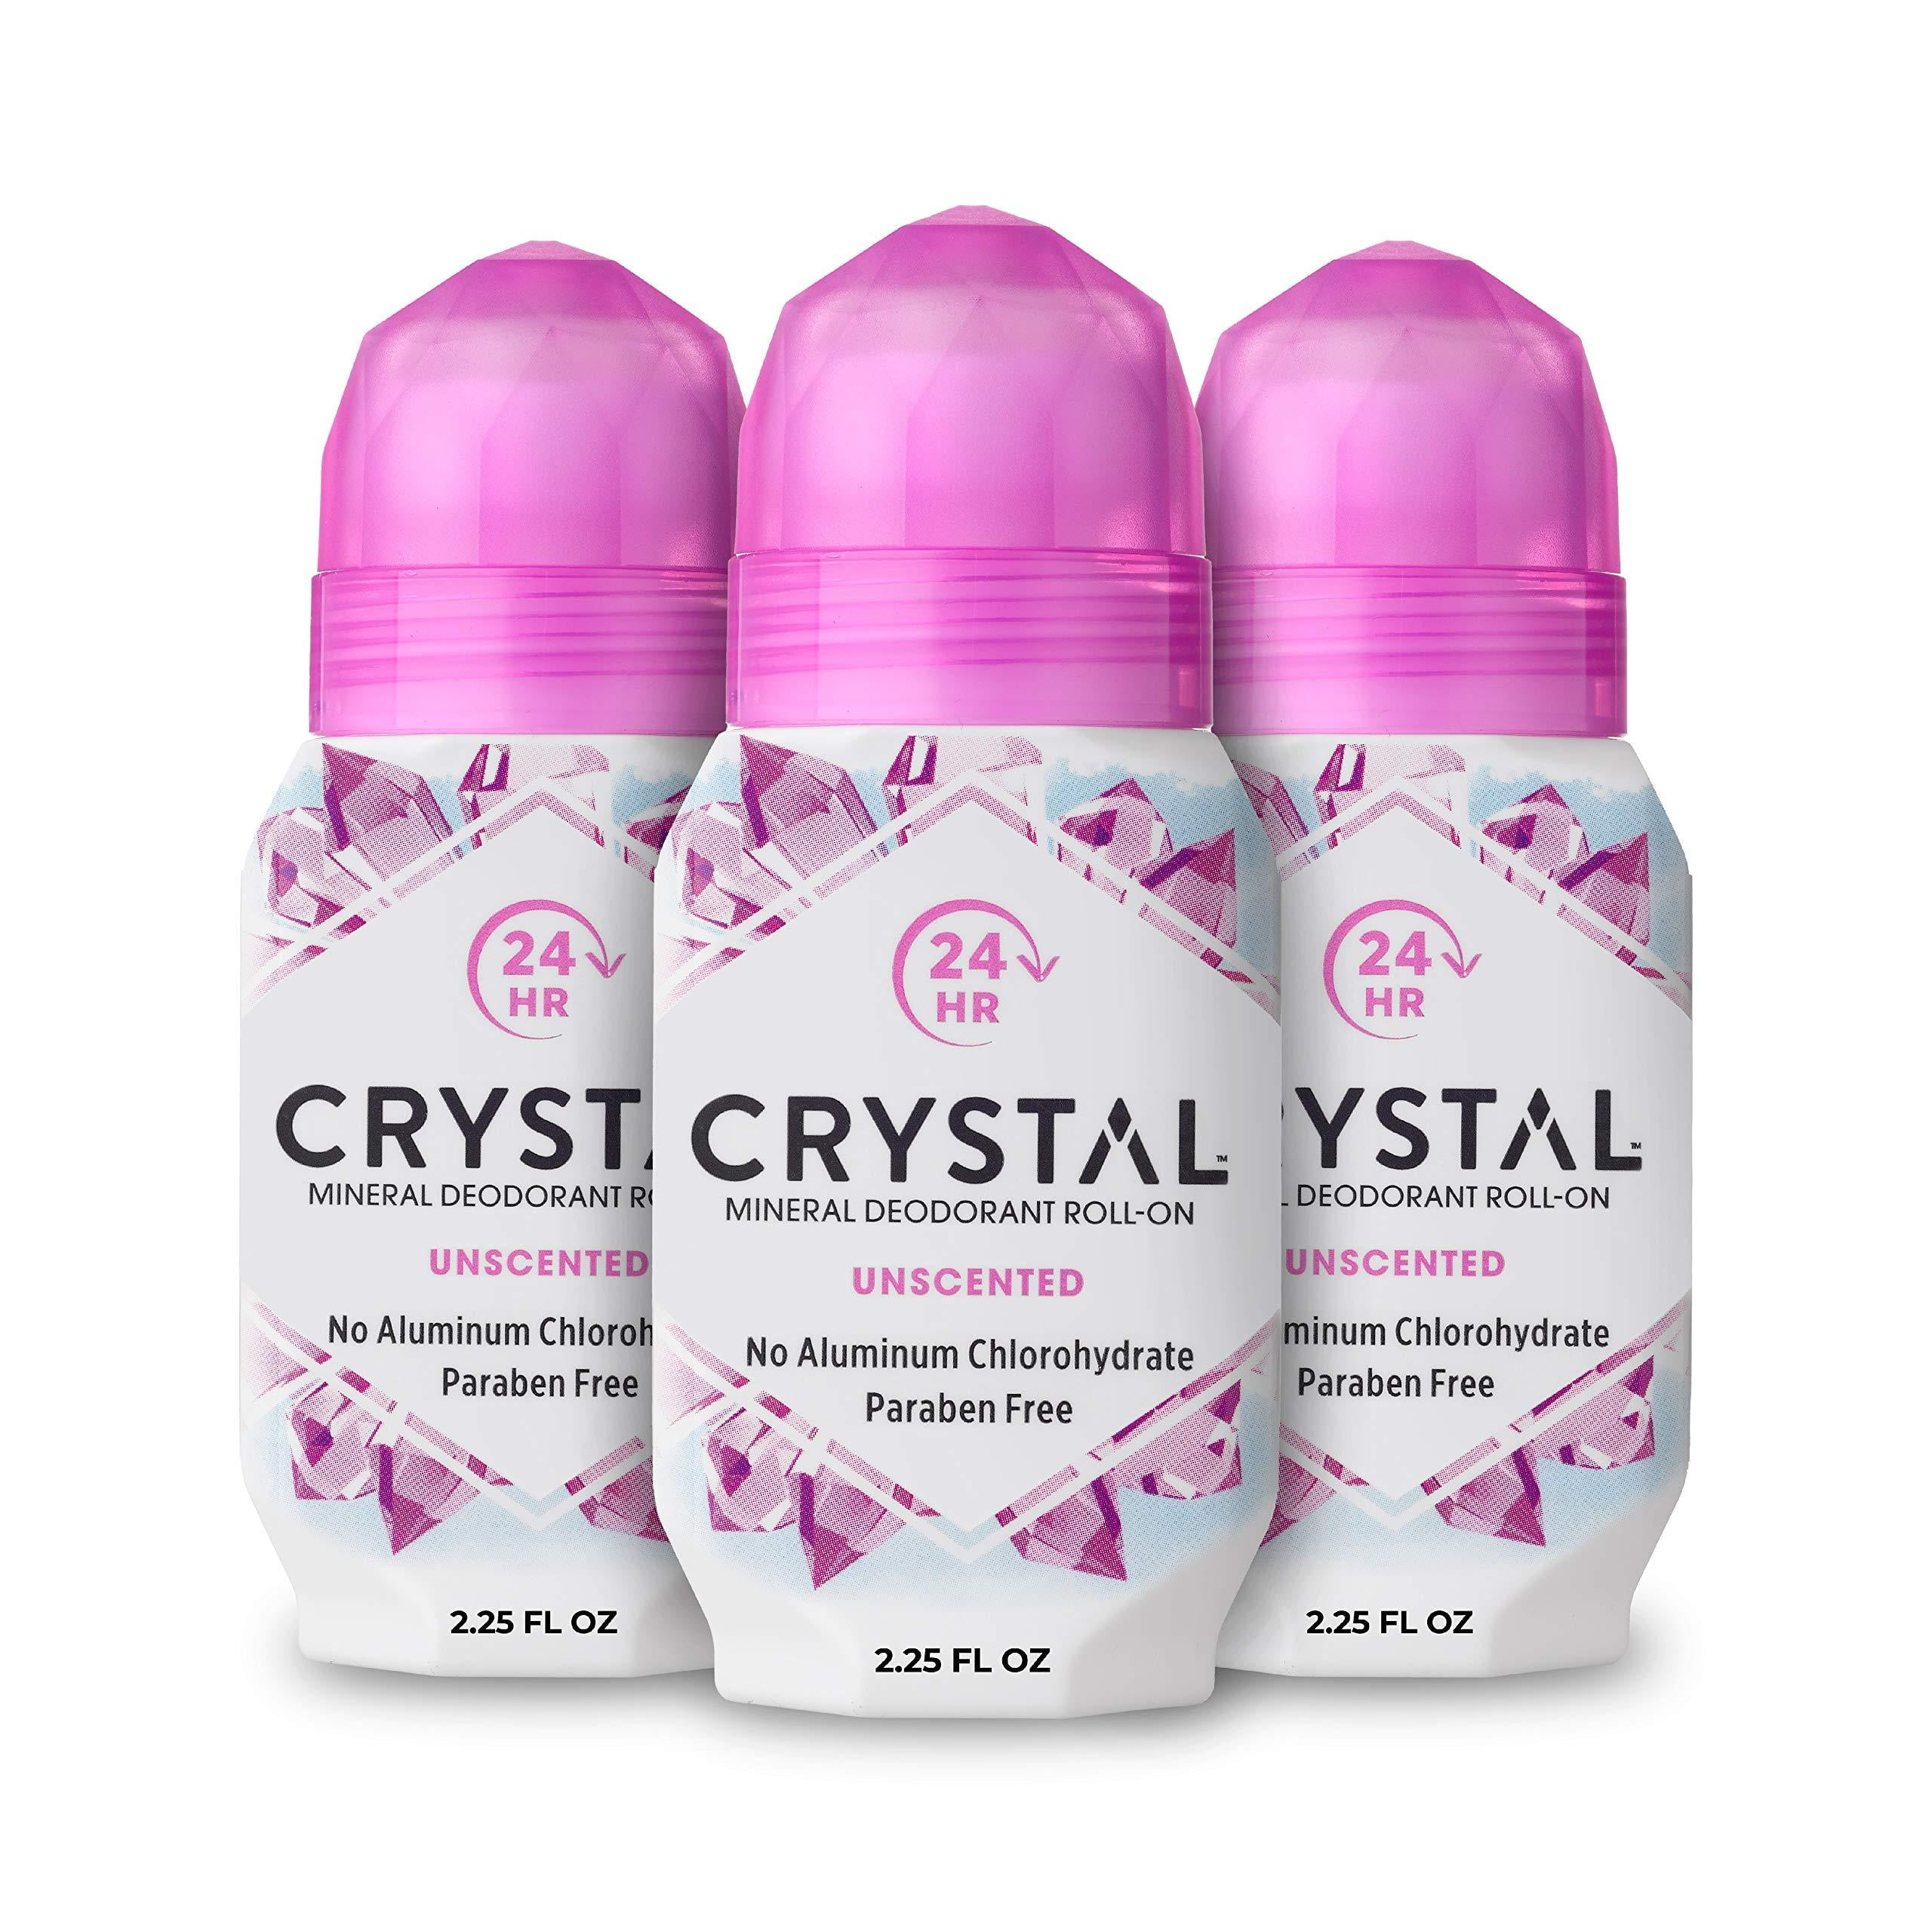 CRYSTAL - Mineral Roll on Vegan Deodorant for Women and Men, Unscented - 2.25 fl. oz. (3 Pack) (Packaging May Vary) - Walmart.com